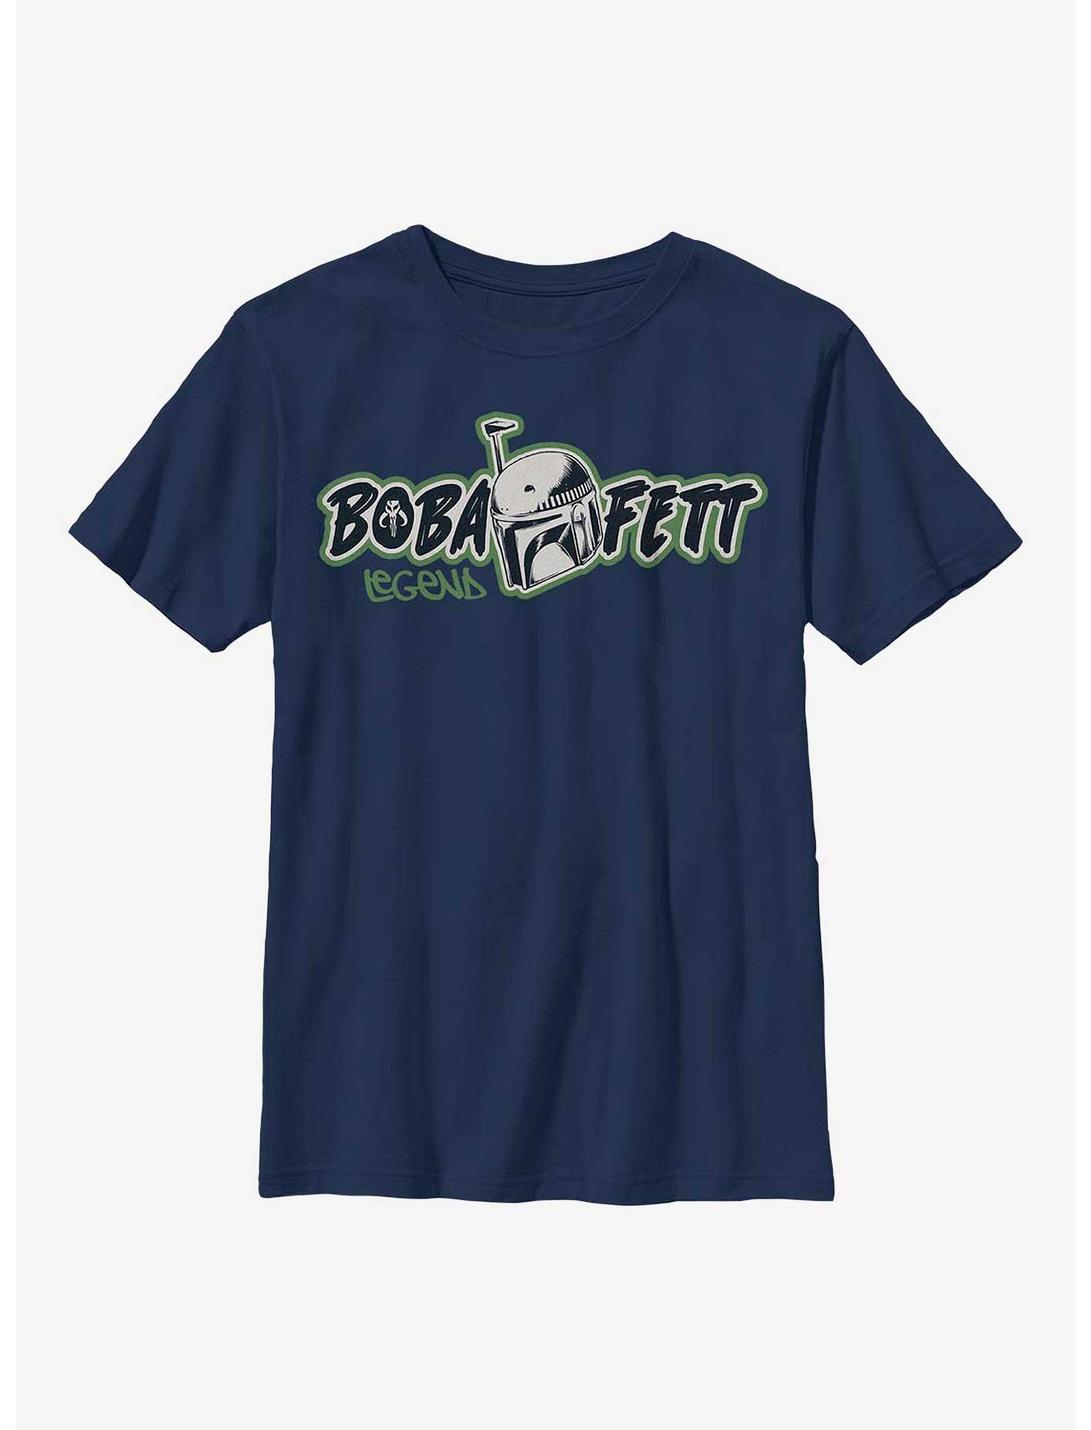 Star Wars: The Book Of Boba Fett Legend Youth T-Shirt, NAVY, hi-res